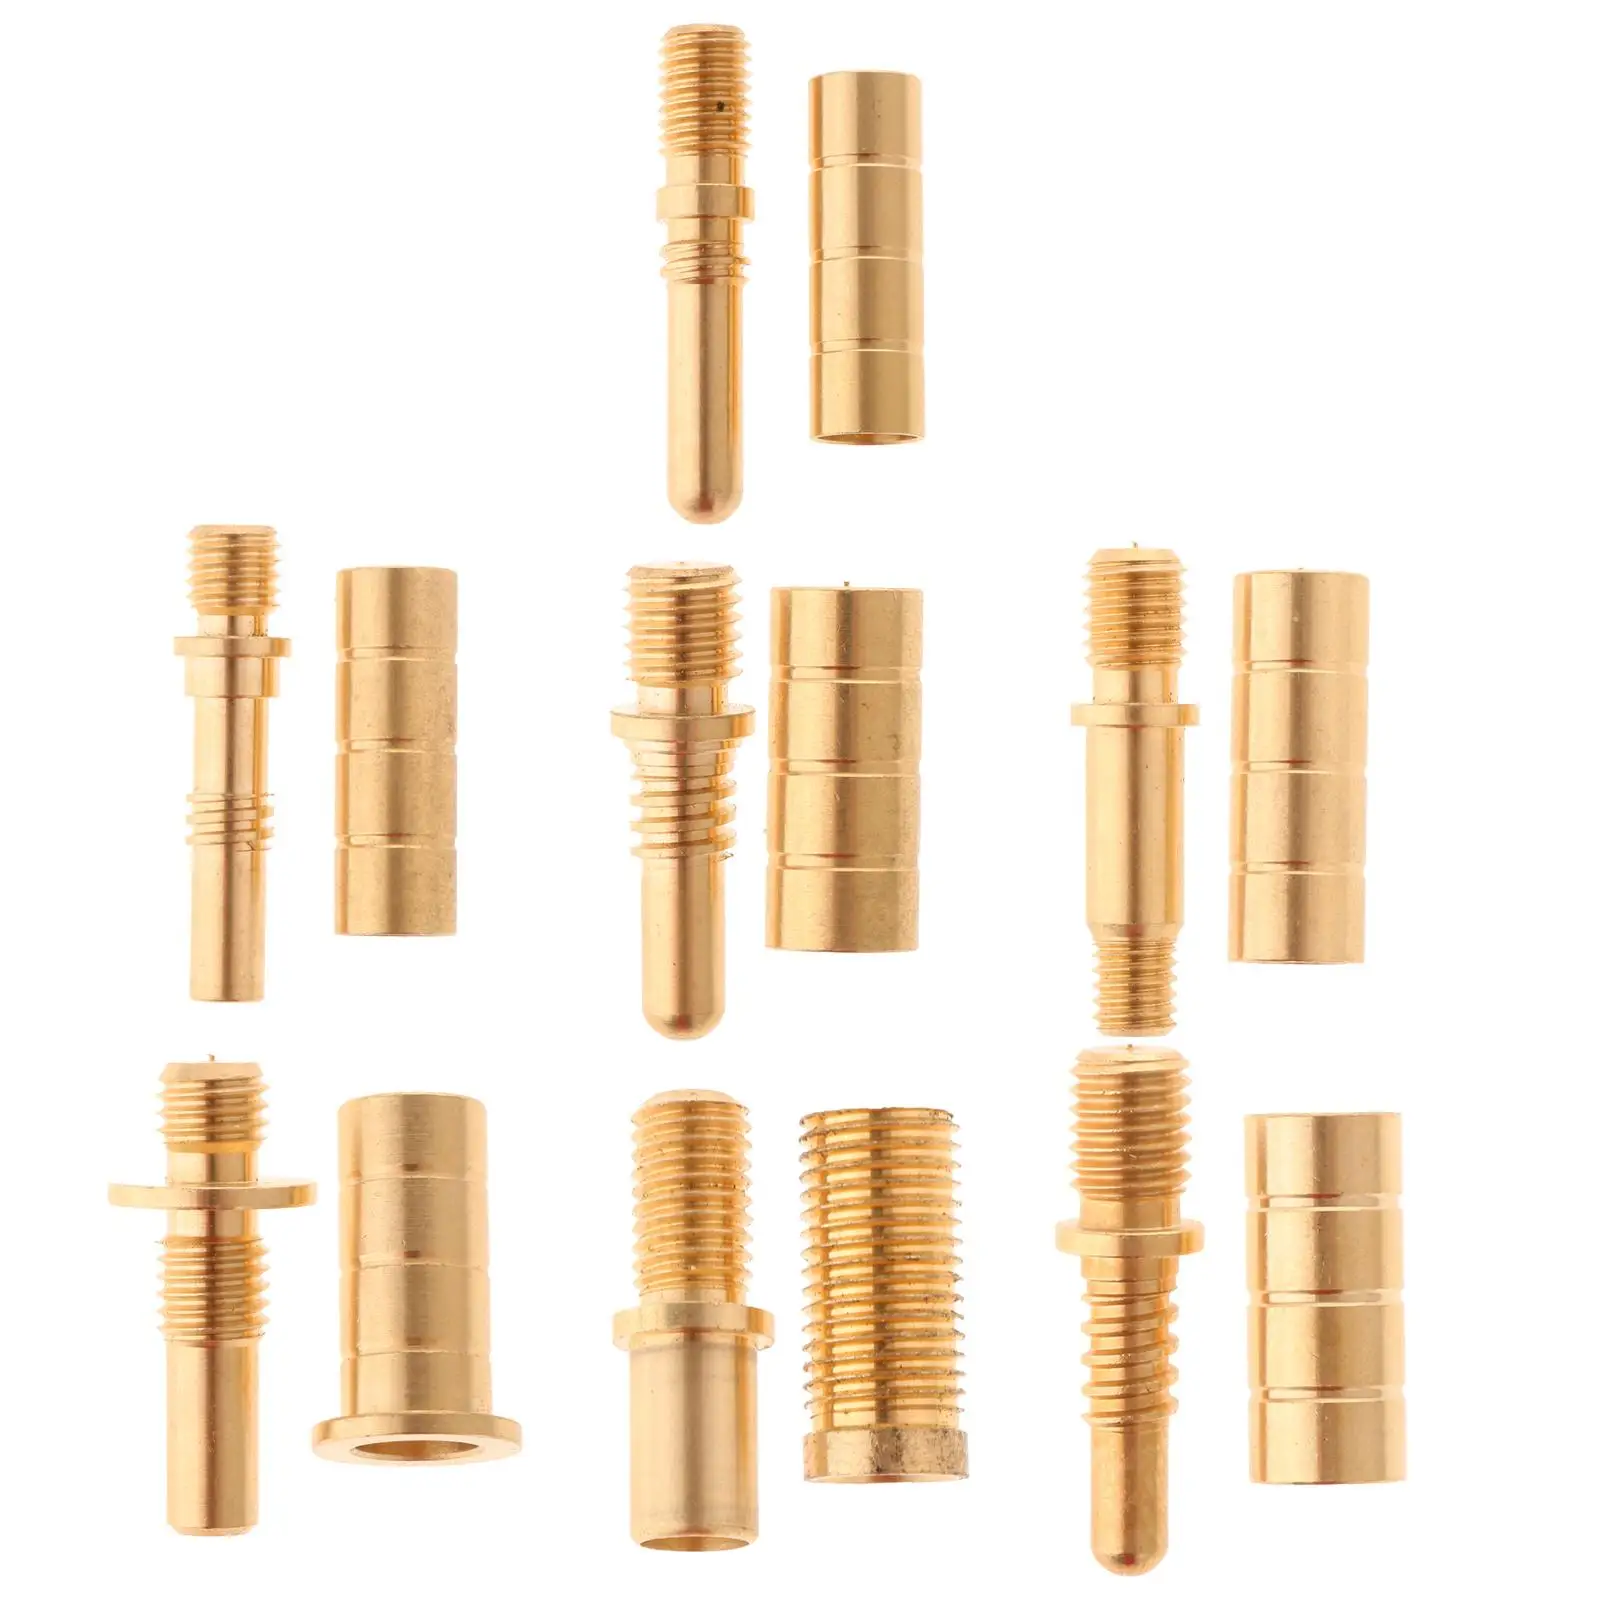 Pool Cue Joint Screw Billiards Part Pool Cue Joint Threads Shaft Fittings Billiard Extension Screws Pool Cue Attachment